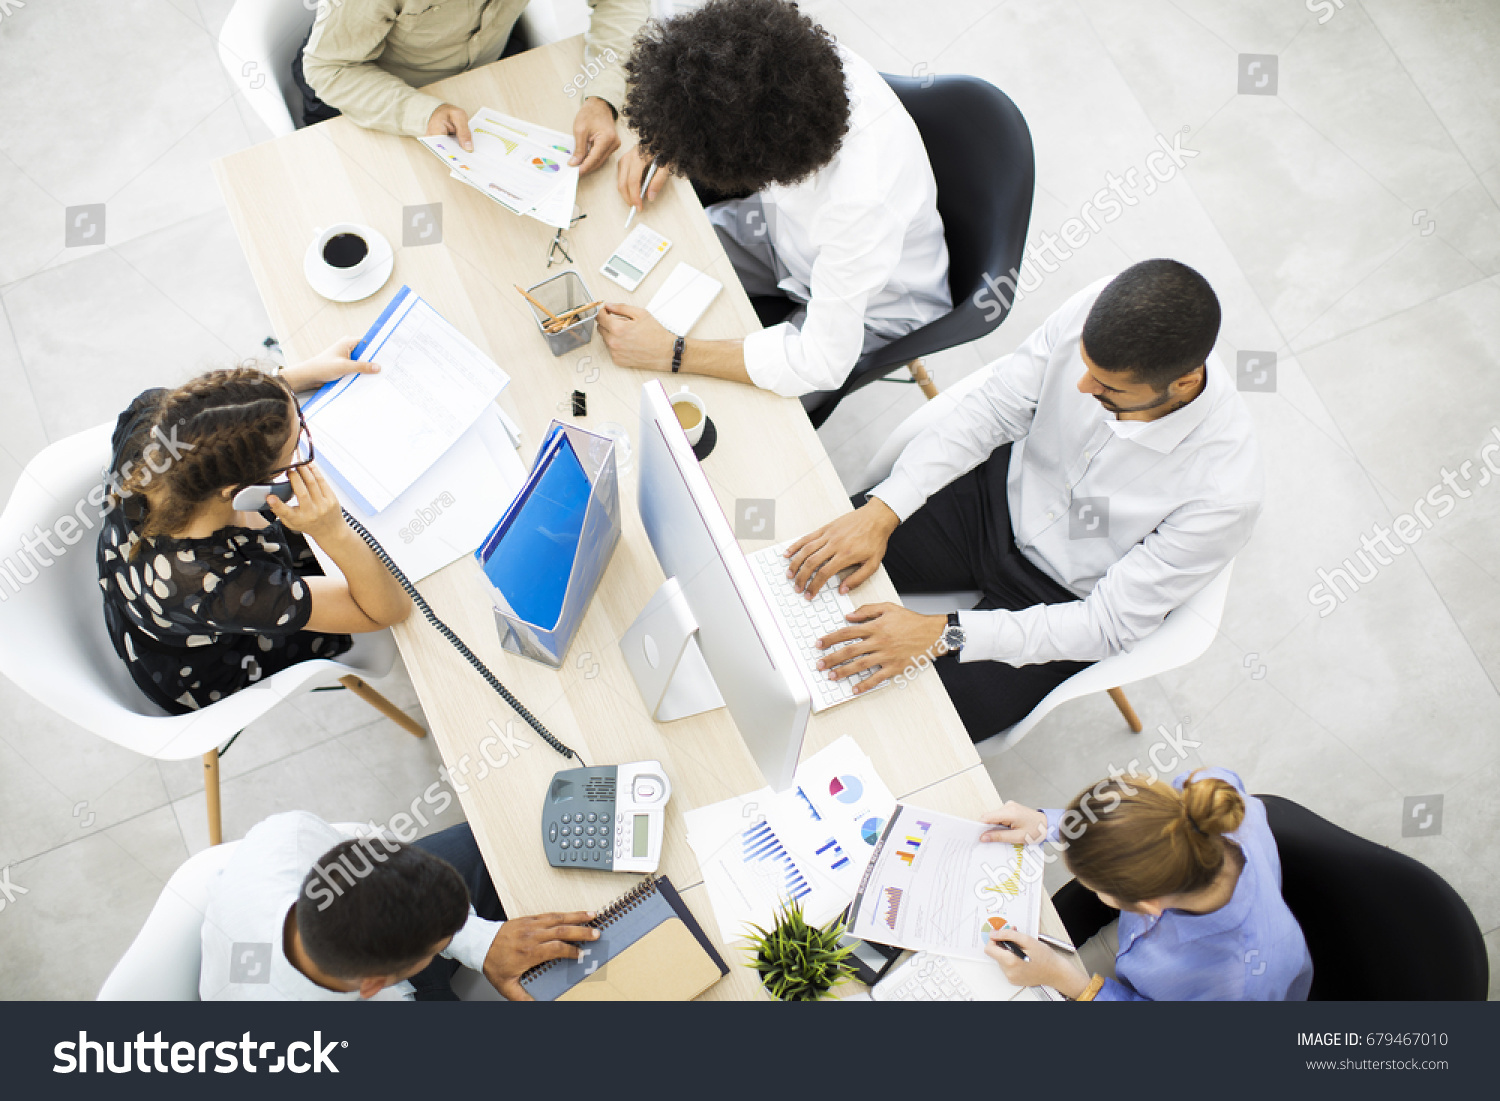 Businesspeople working in office #679467010